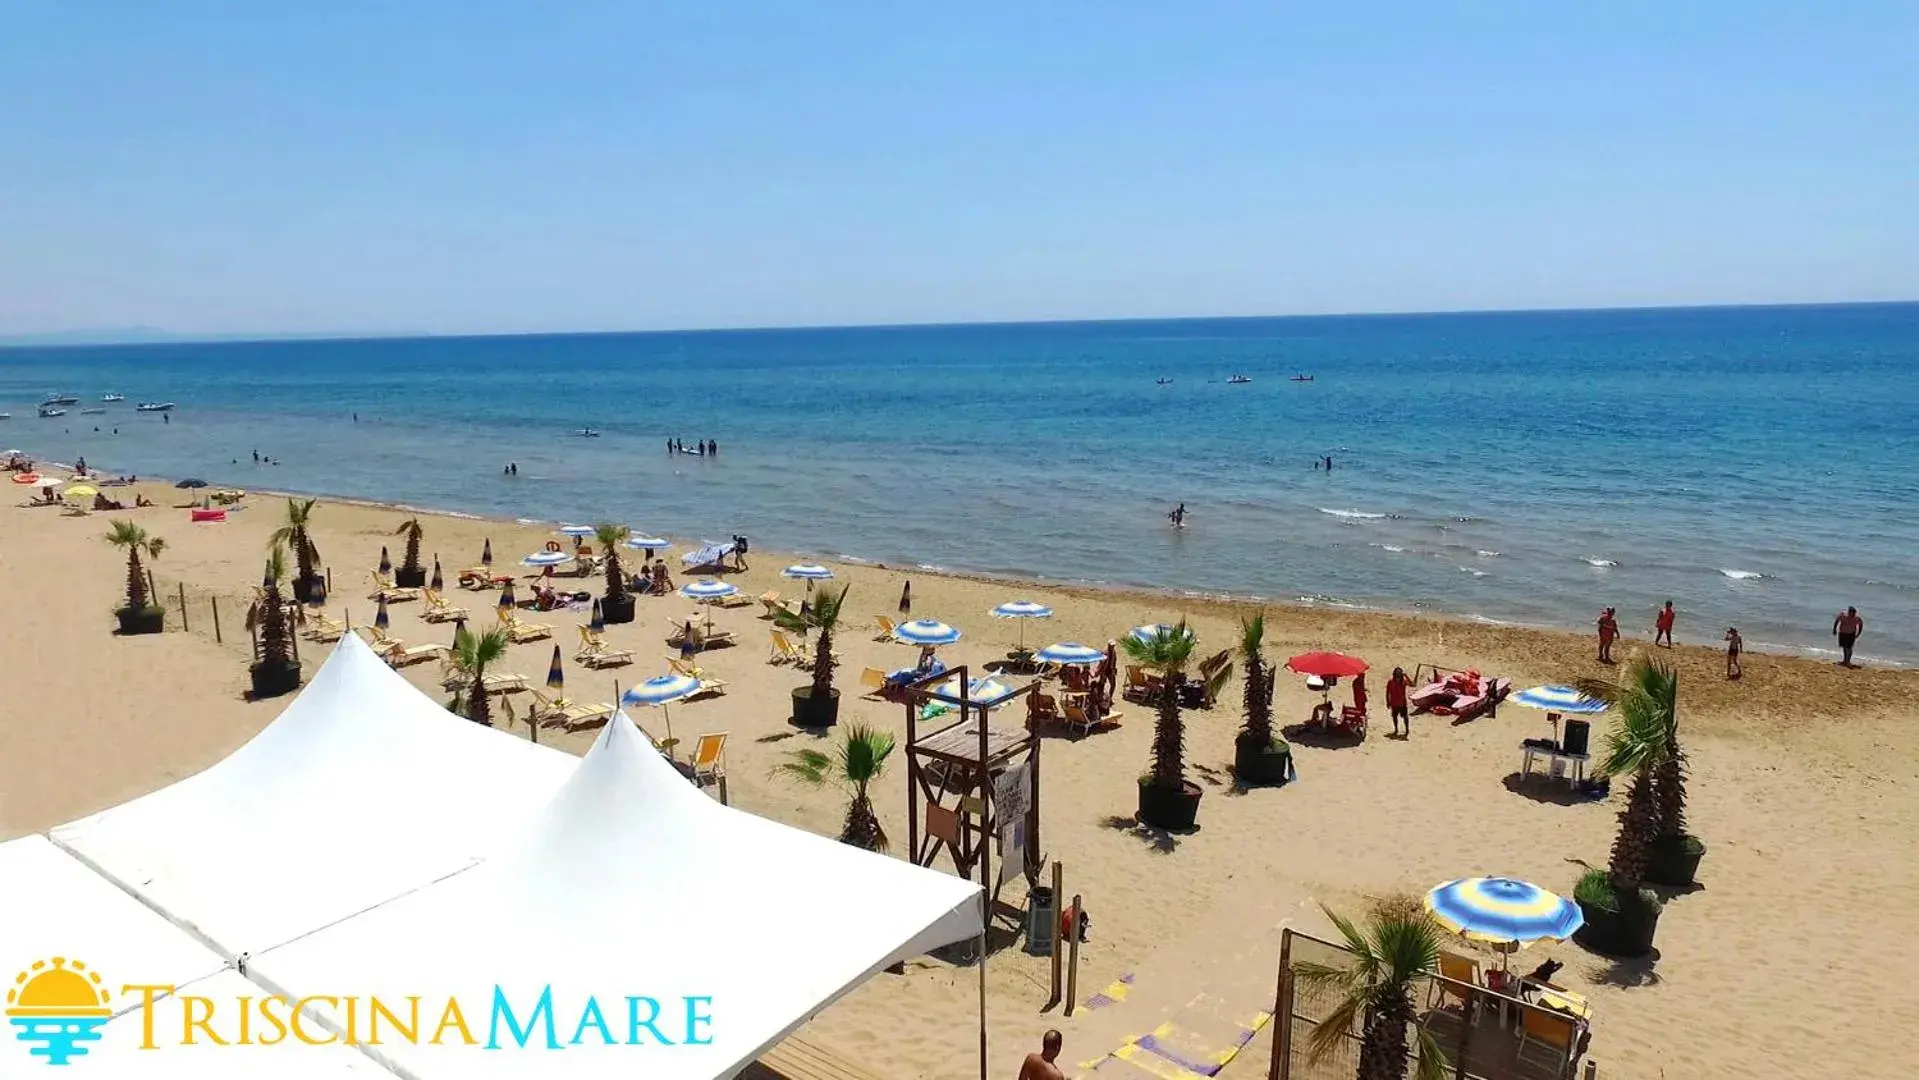 Beach in Triscinamare Hotel Residence